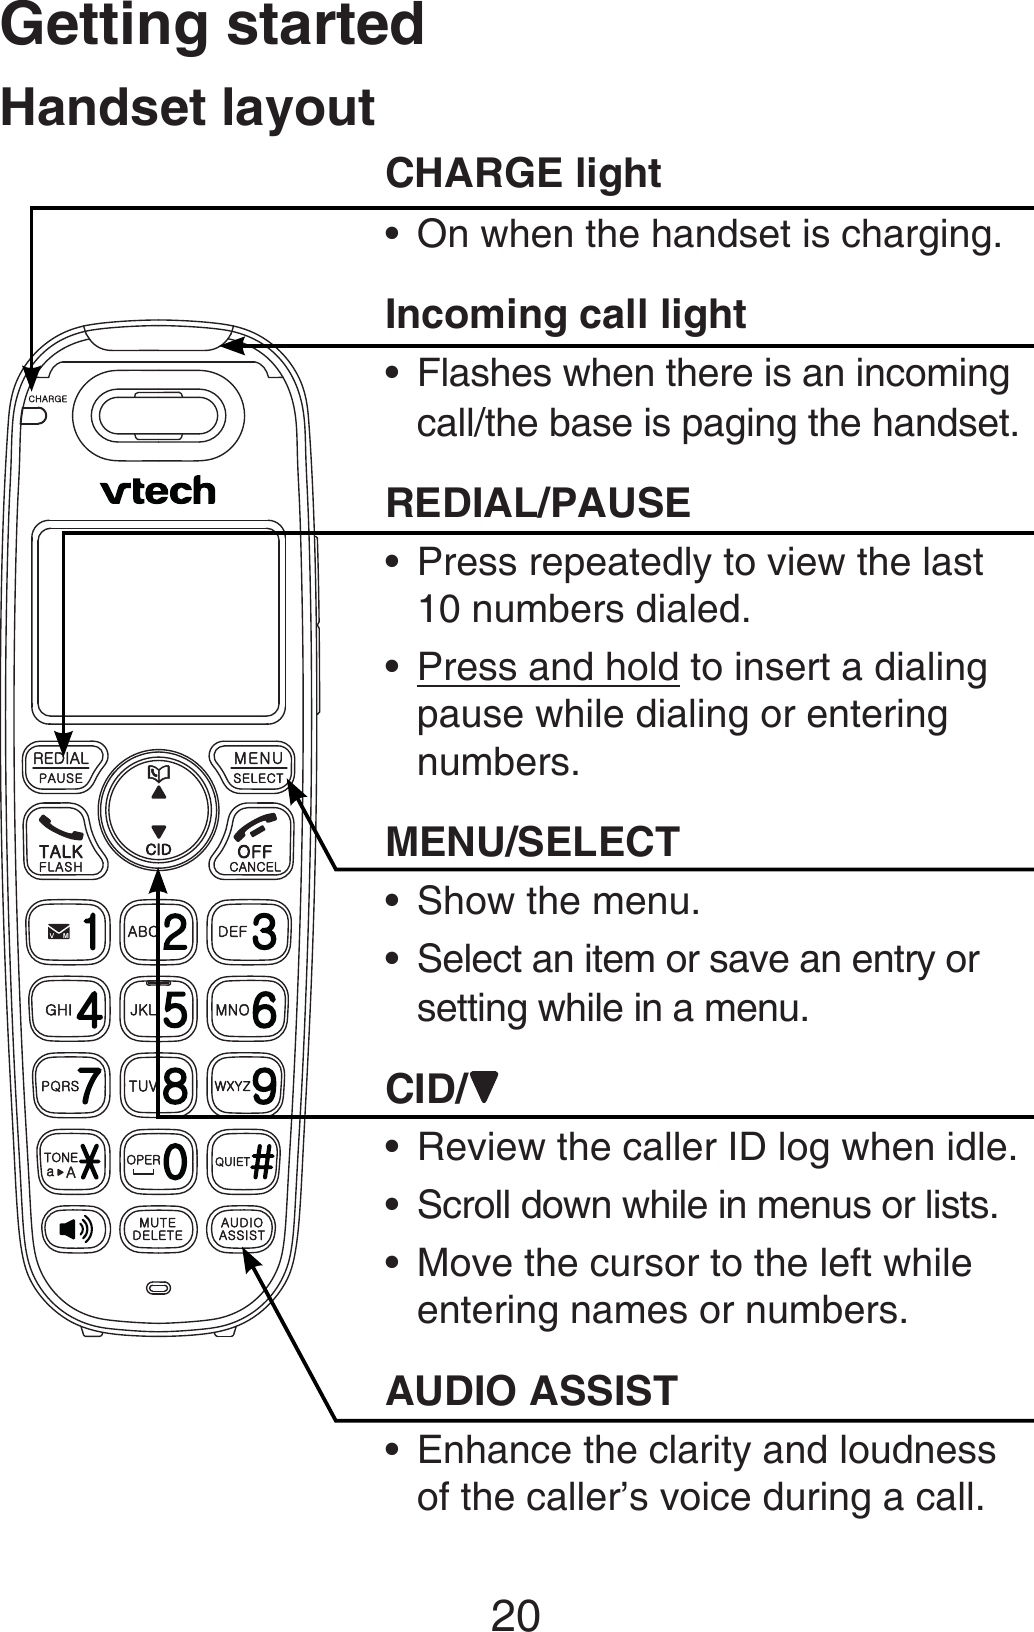 Getting started20CHARGE lightOn when the handset is charging.Incoming call lightFlashes when there is an incoming call/the base is paging the handset.REDIAL/PAUSEPress repeatedly to view the last 10 numbers dialed.Press and hold to insert a dialing pause while dialing or entering numbers.MENU/SELECTShow the menu.Select an item or save an entry or setting while in a menu.CID/Review the caller ID log when idle.Scroll down while in menus or lists.Move the cursor to the left while entering names or numbers.AUDIO ASSISTEnhance the clarity and loudness of the caller’s voice during a call.••••••••••Handset layout